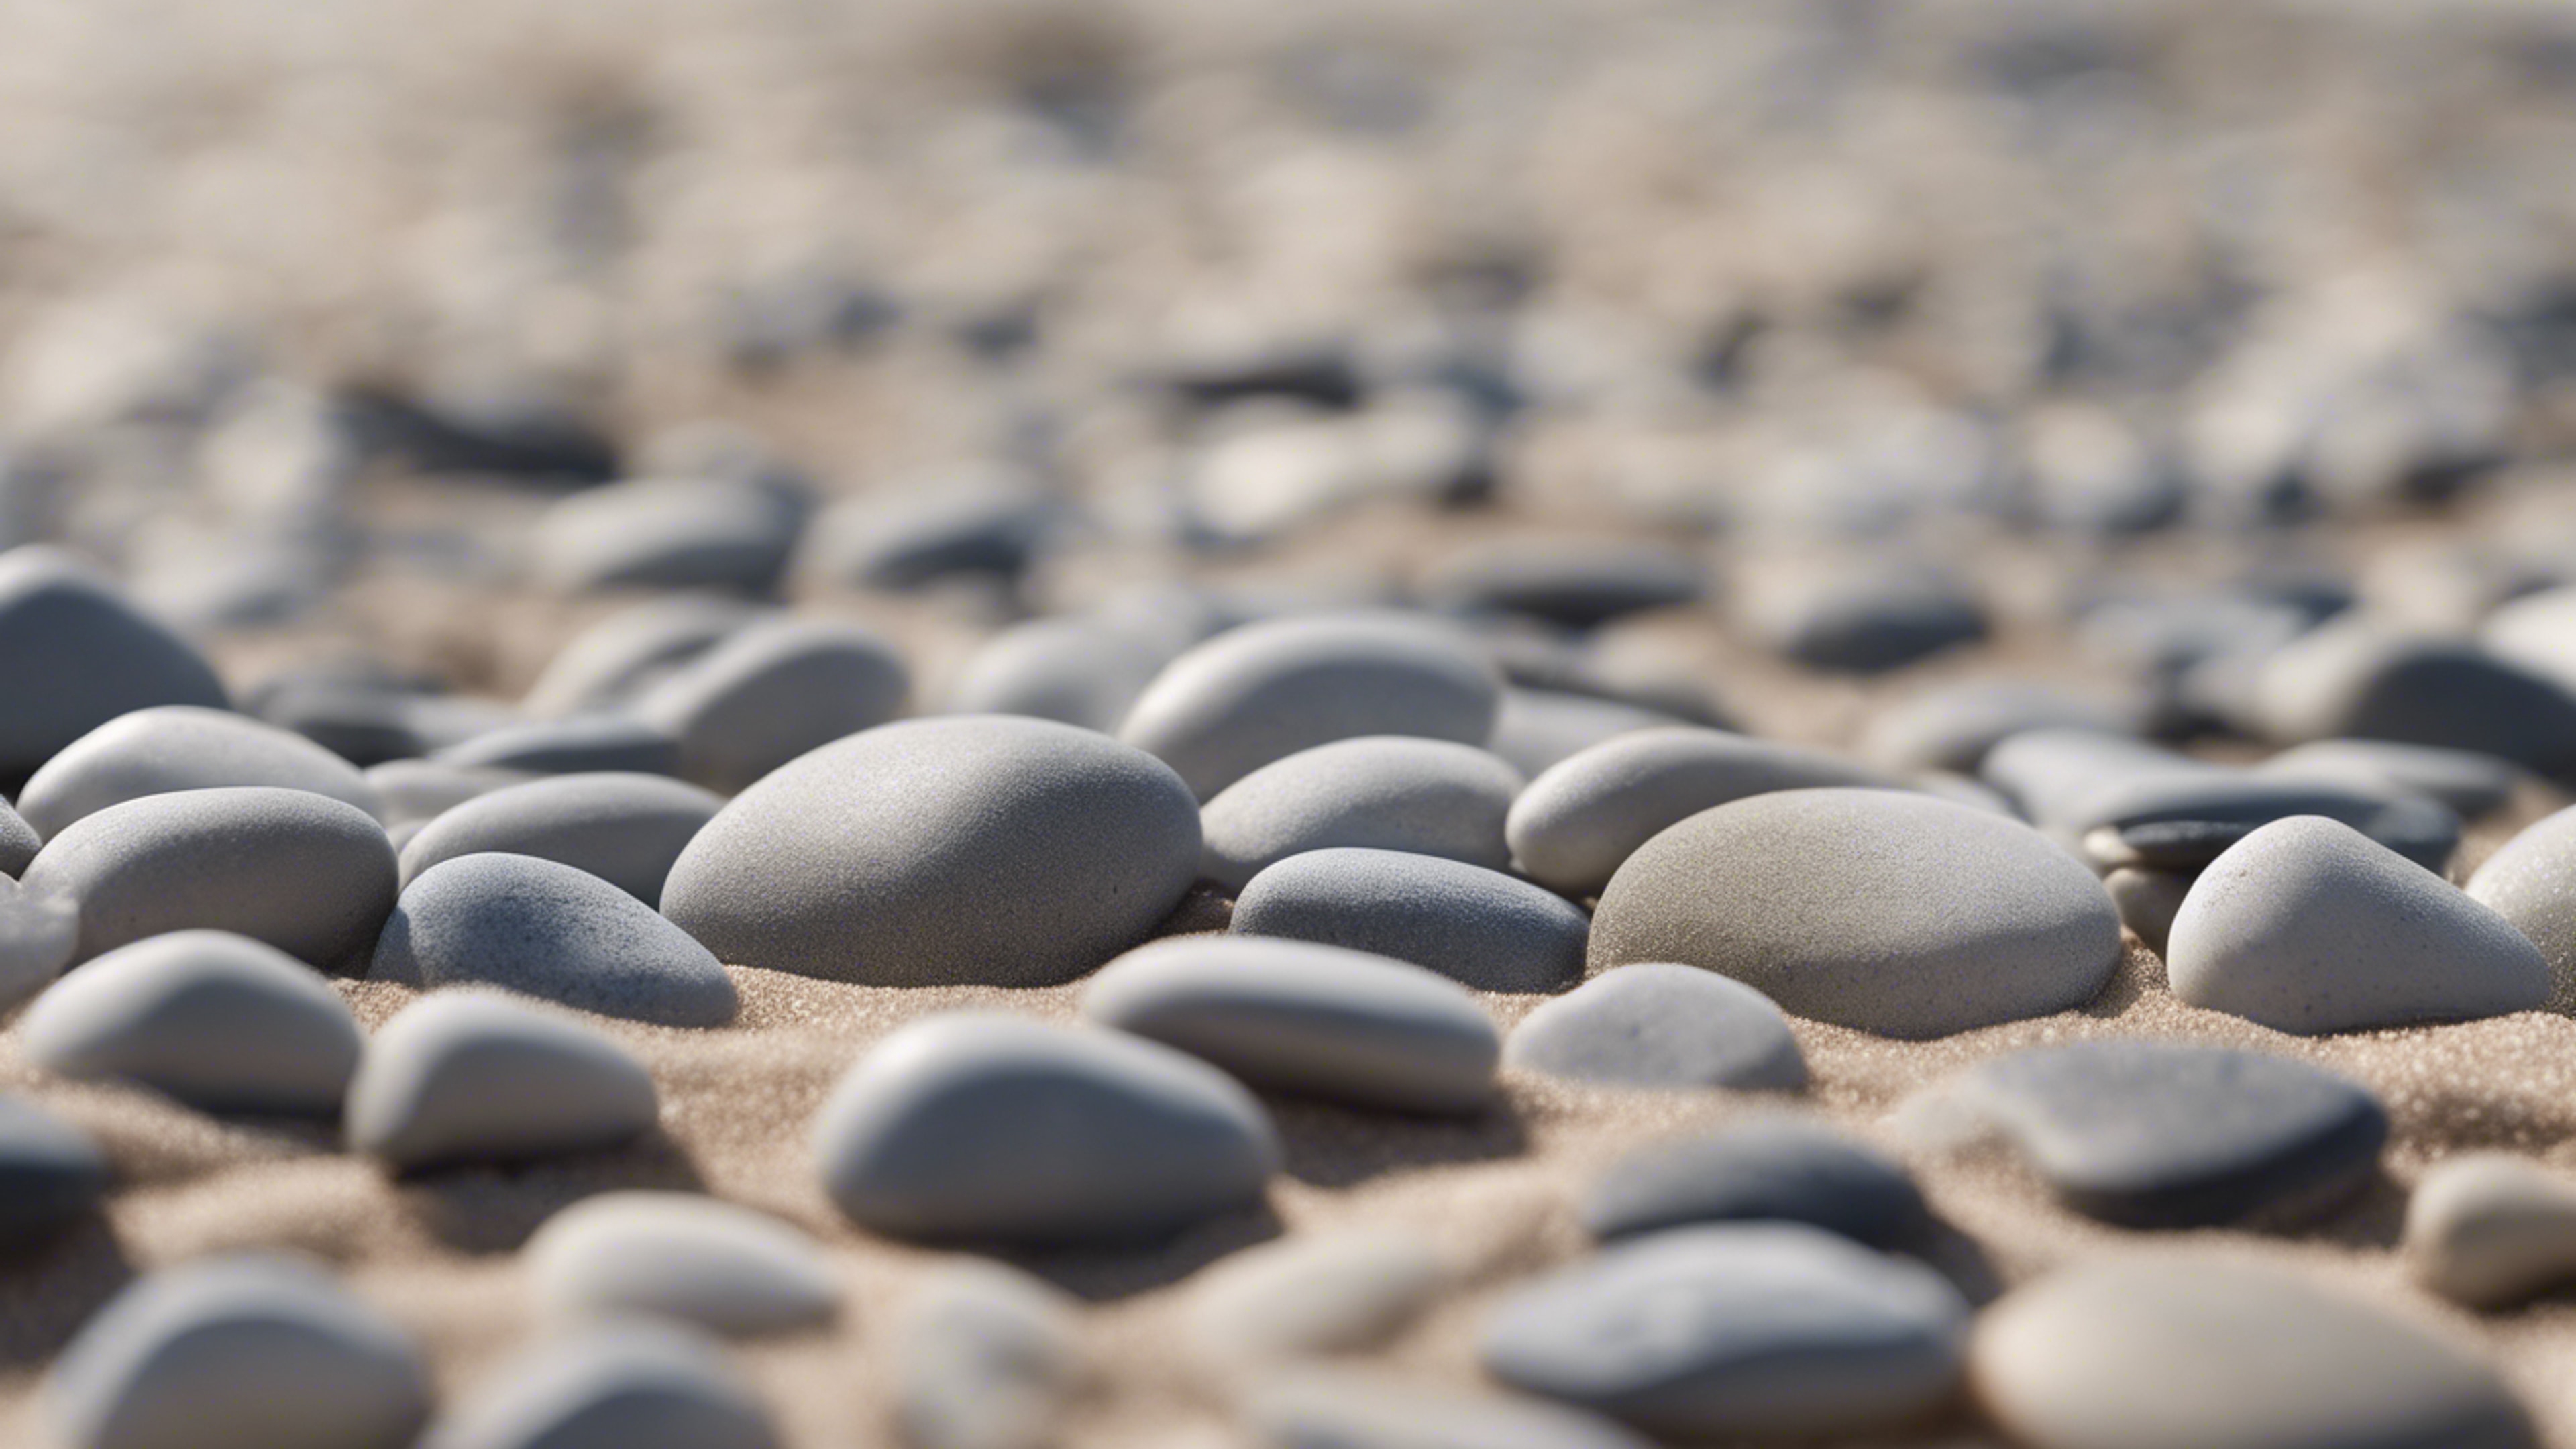 A collection of light gray pebbles arranged in an intricate pattern on a sandy beach. Дэлгэцийн зураг[7440af21c01a4a2abeaf]